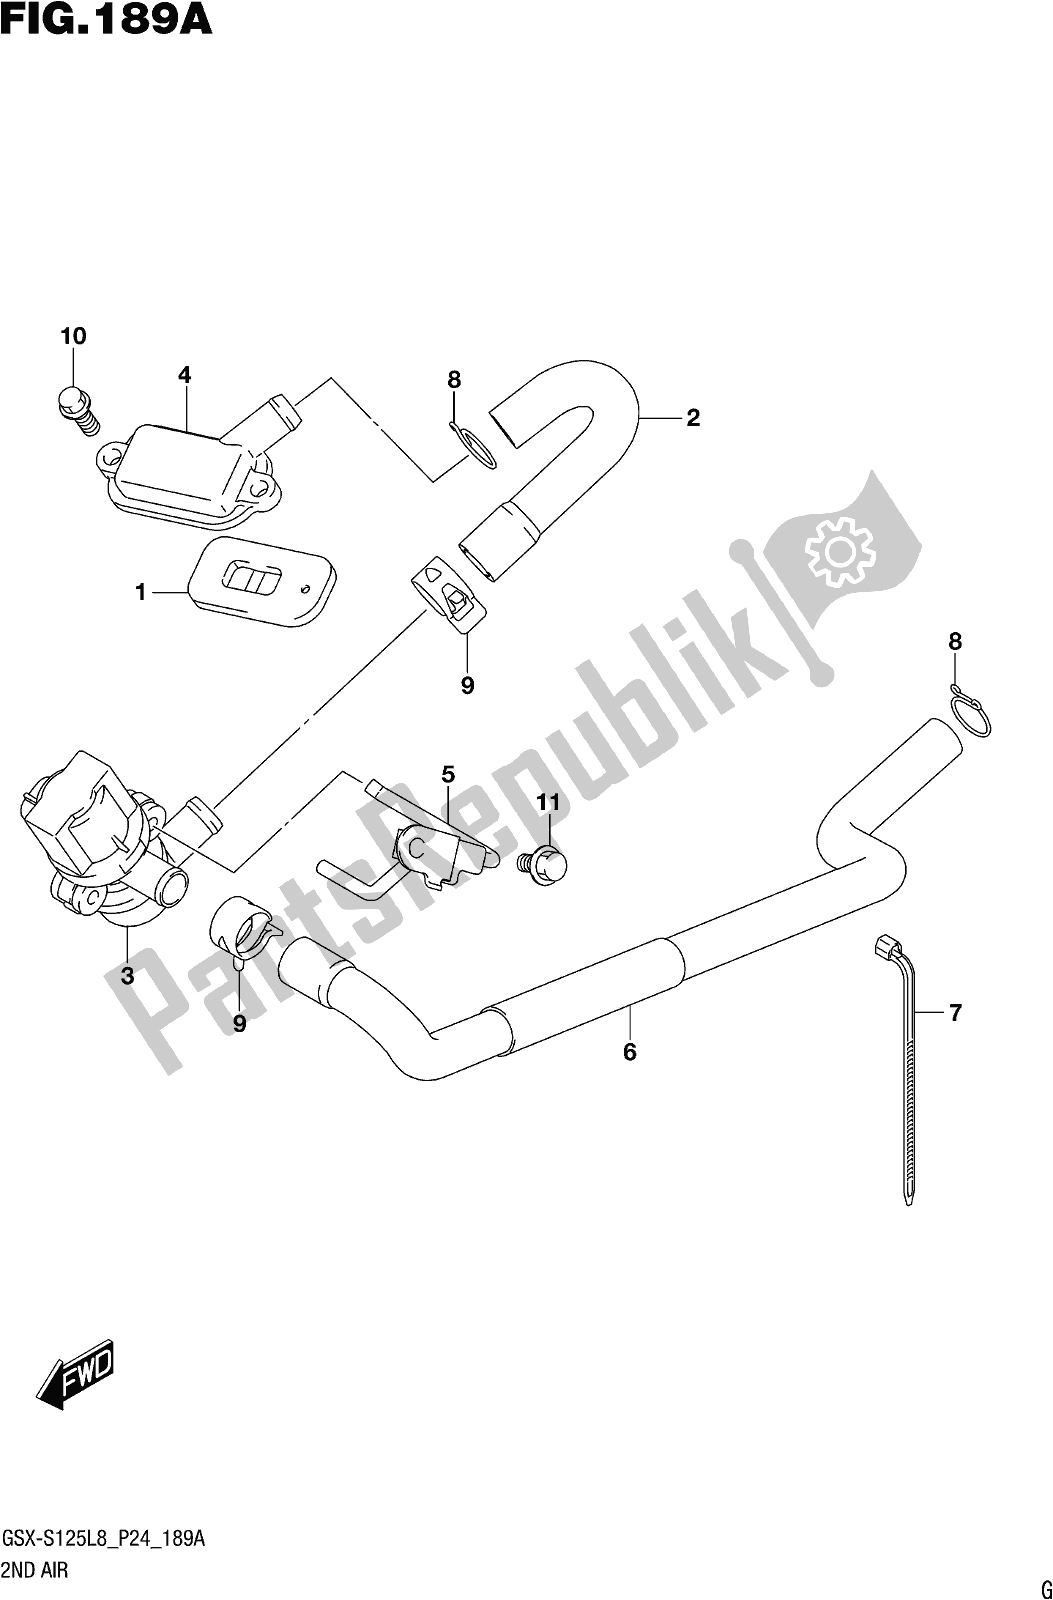 All parts for the Fig. 189a 2nd Air of the Suzuki Gsx-s 125 ML 2018